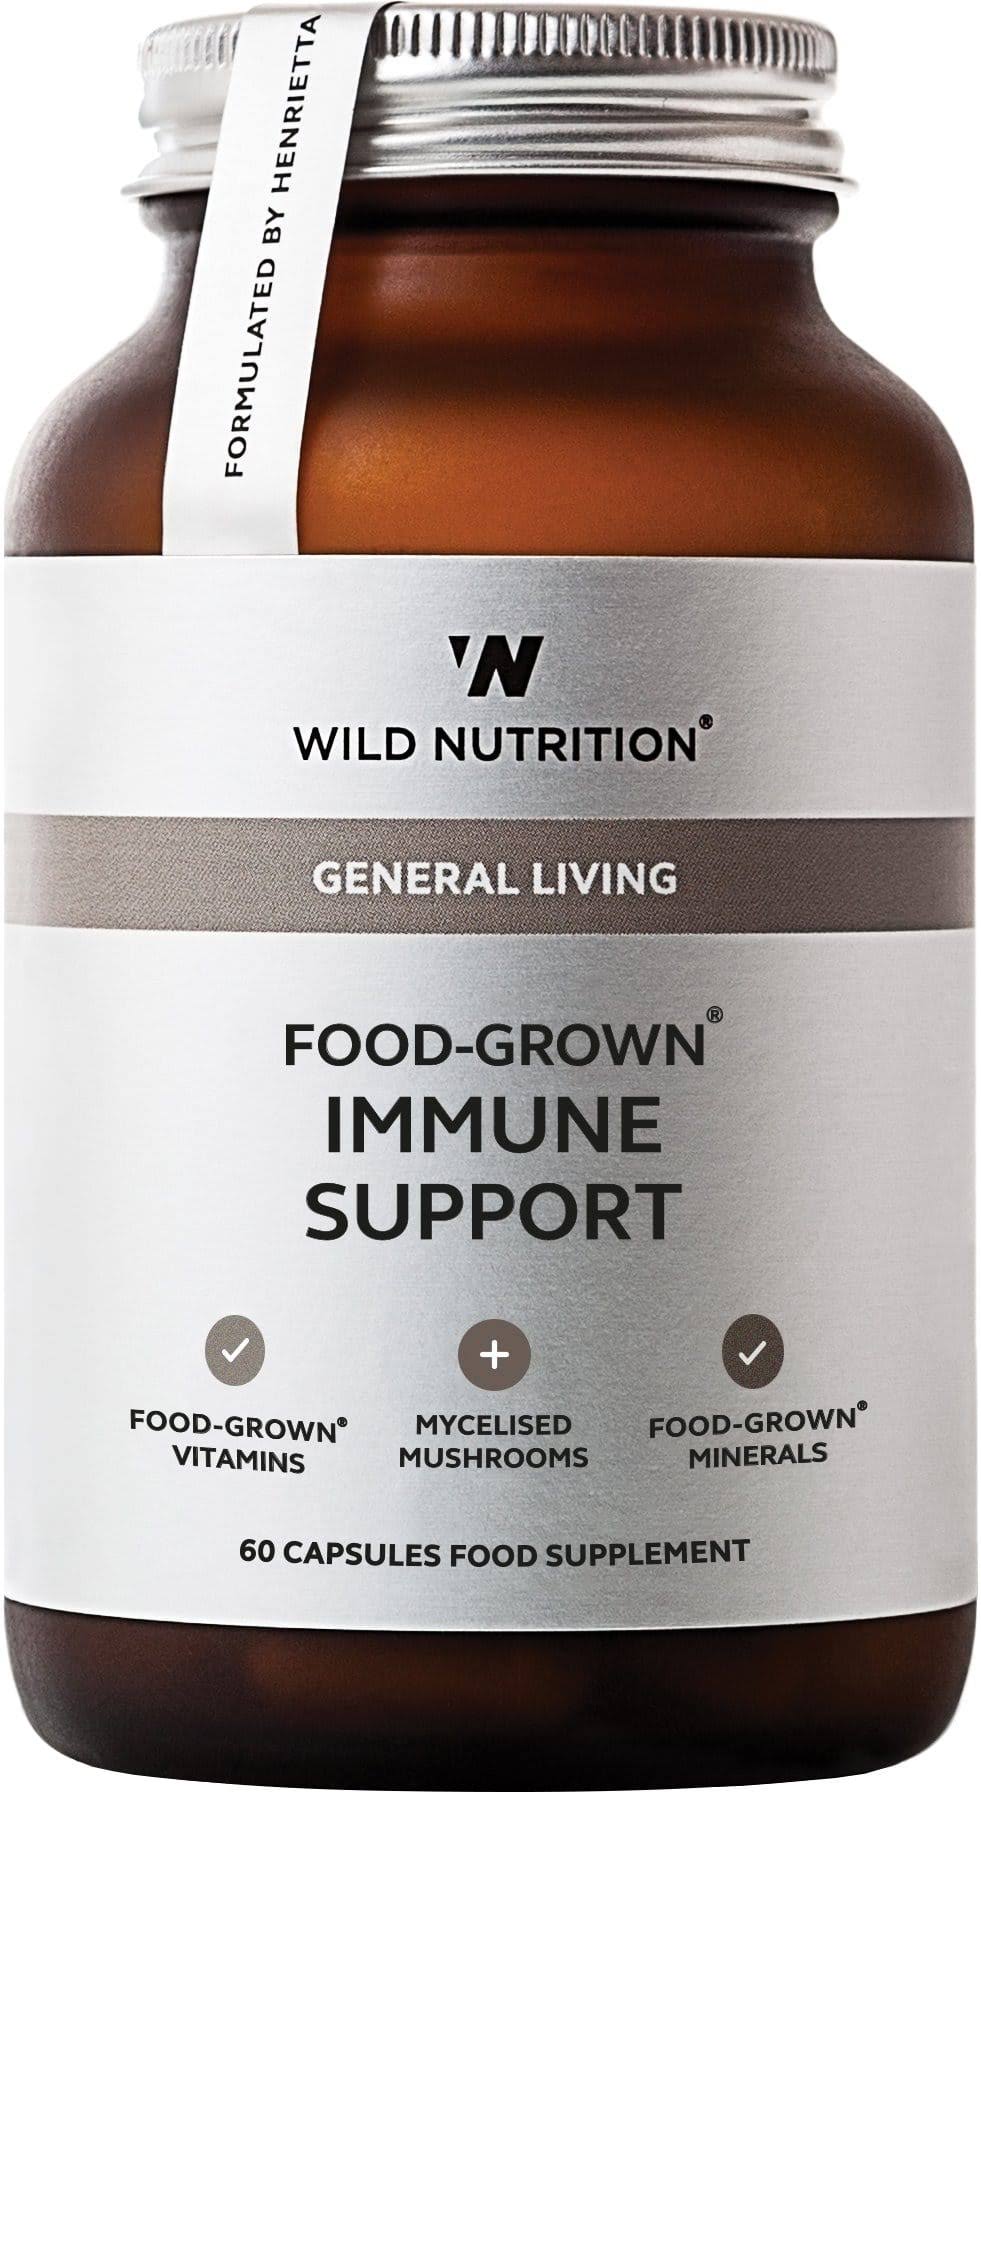 Wild Nutrition Food-Grown Immune Support (60 Capsules)